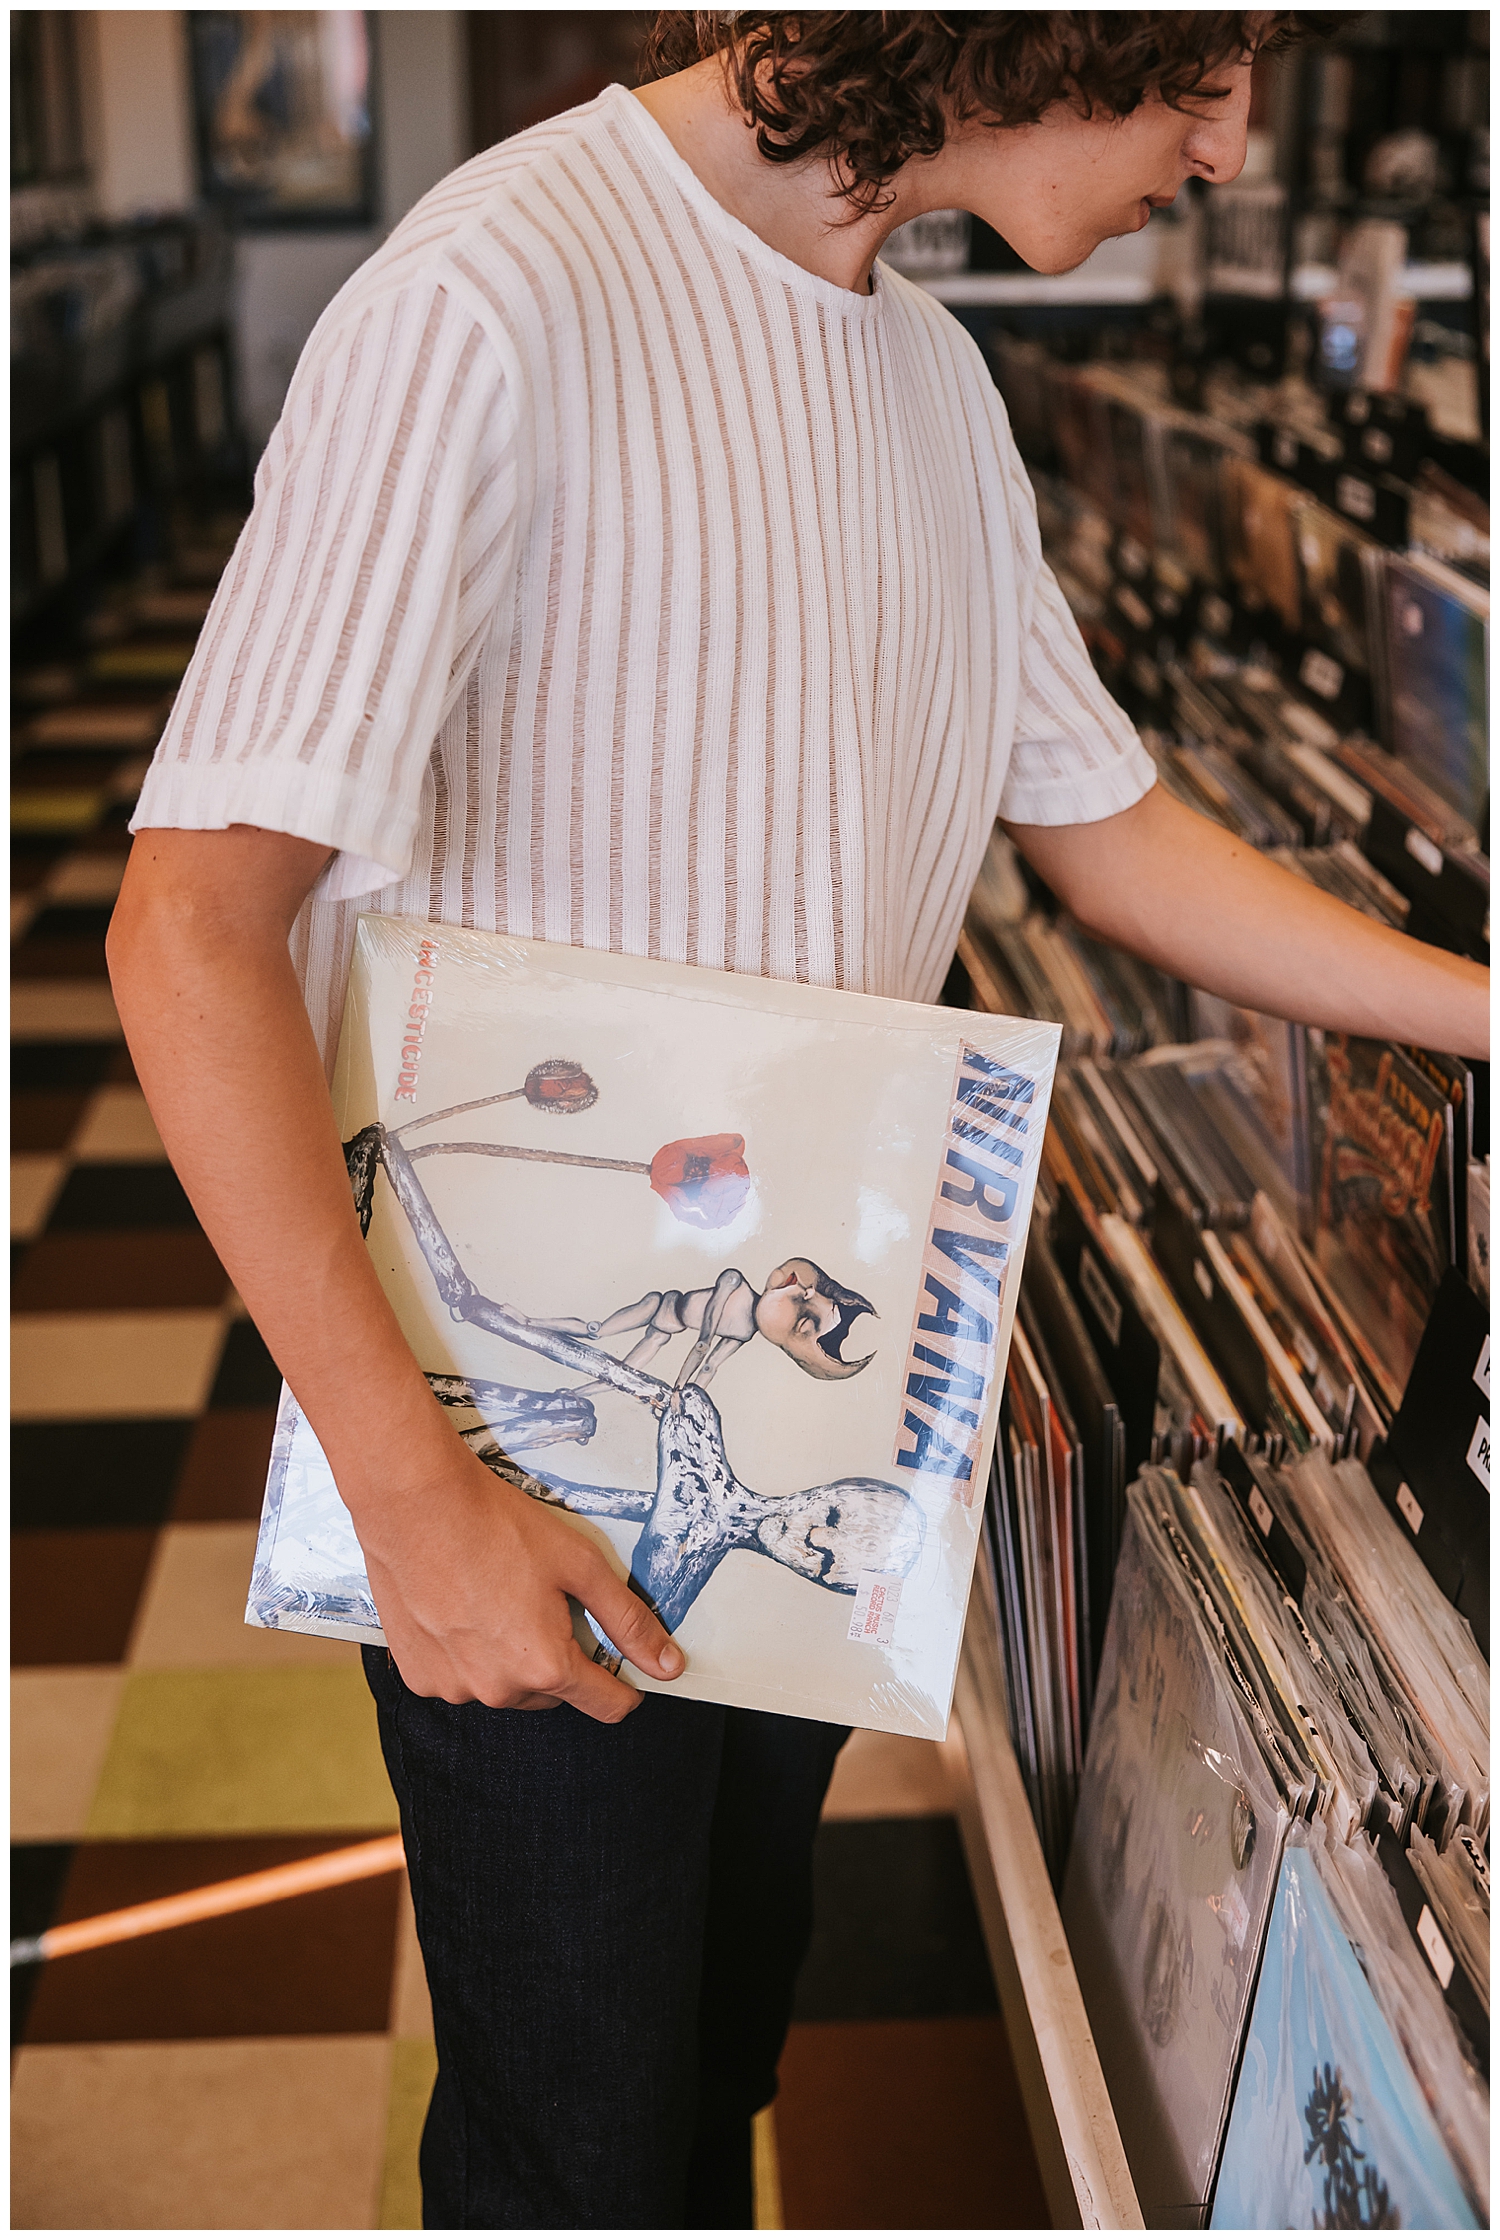 close up image of guy in white shirt holding record album